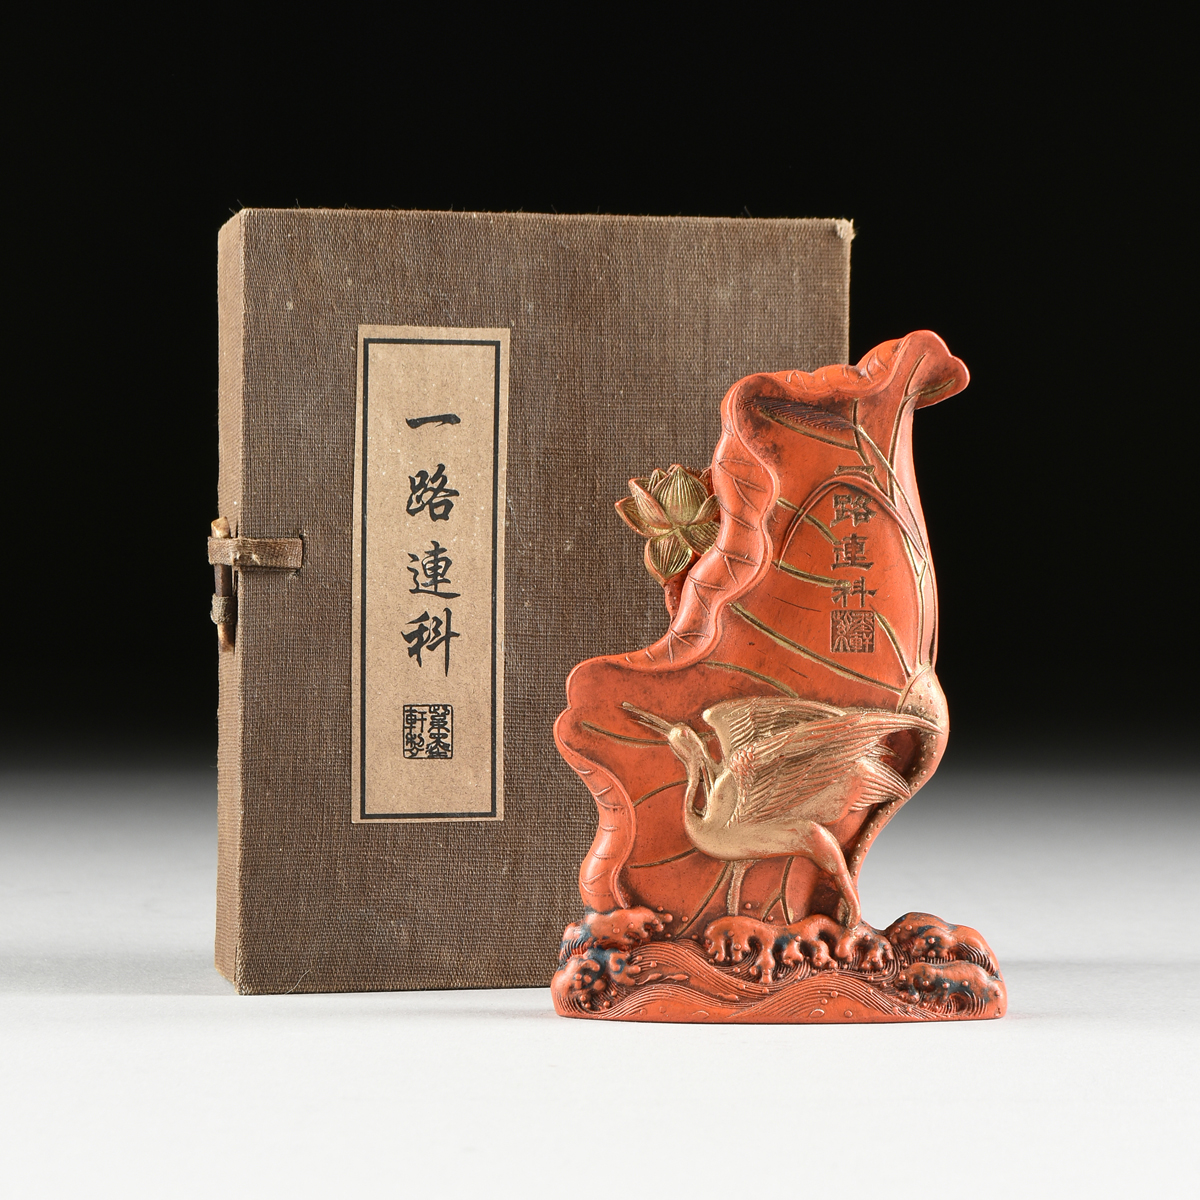 A FAR EAST ASIAN PARCEL GILT ORANGE LACQUER SEAL, LATE 19TH/EARLY 20TH CENTURY, a vegetal lotus leaf - Image 2 of 6